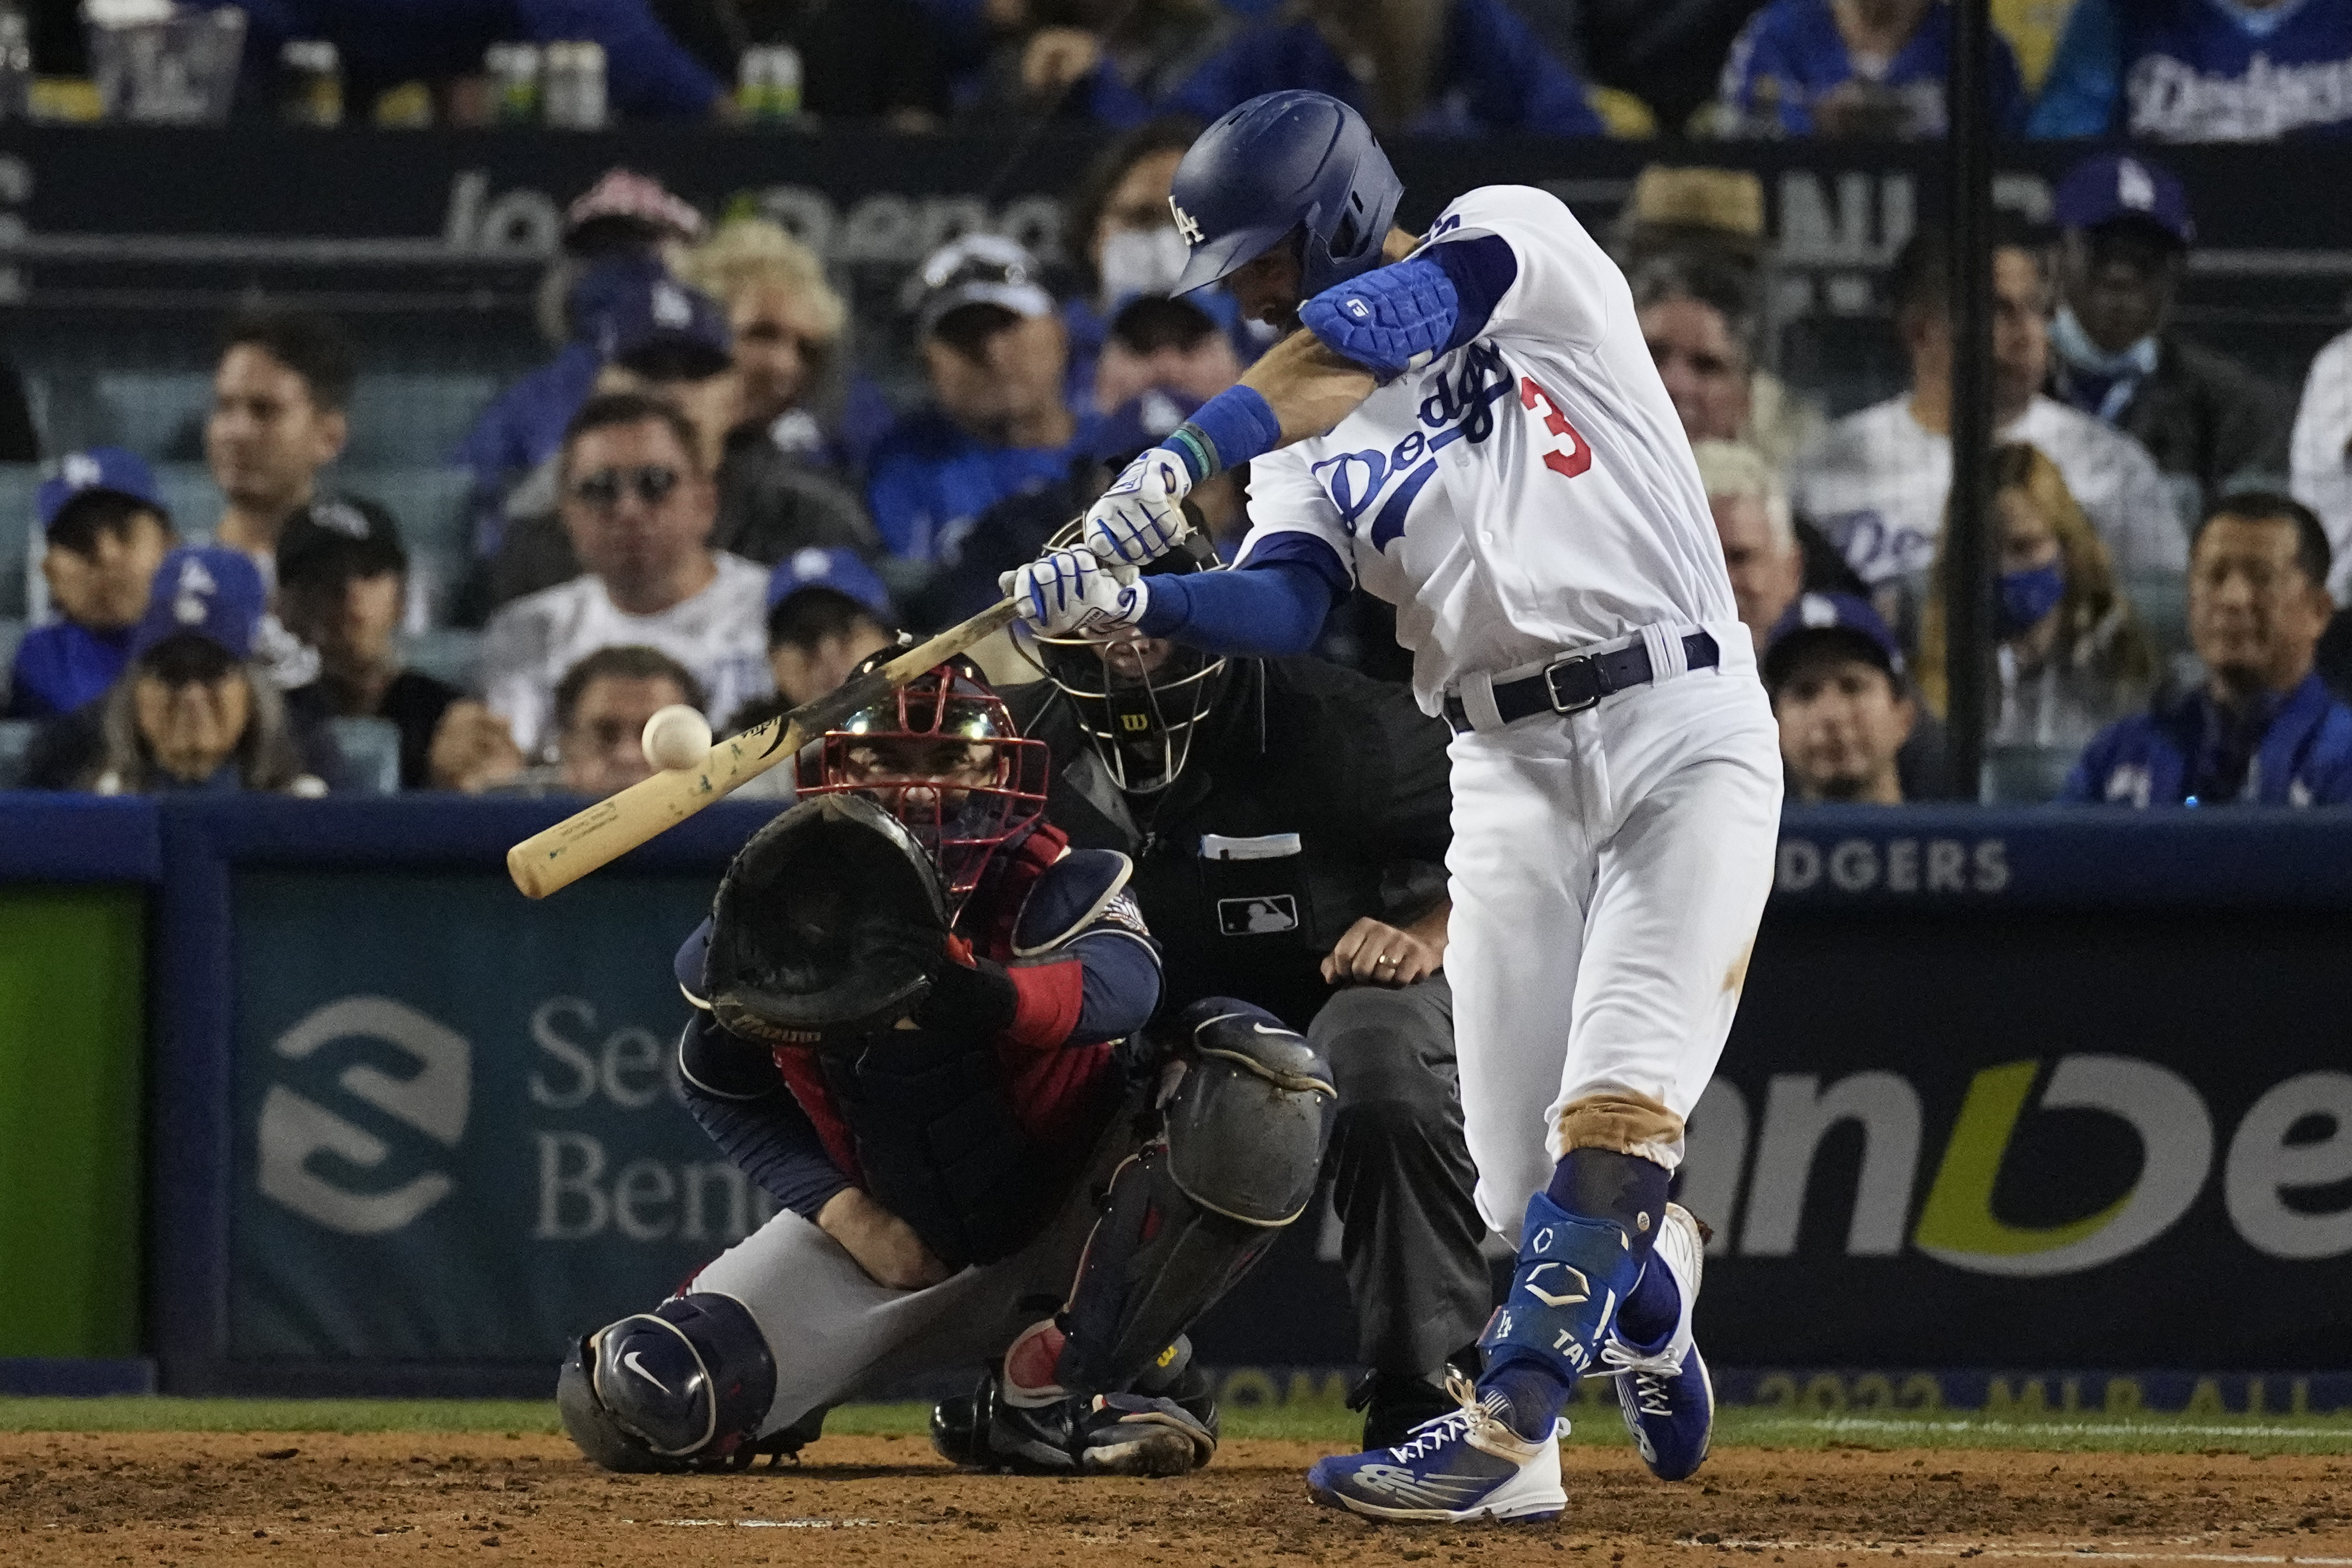 Braves defeat Dodgers 3-2 on walk-off single in NLCS Game 1 - Los